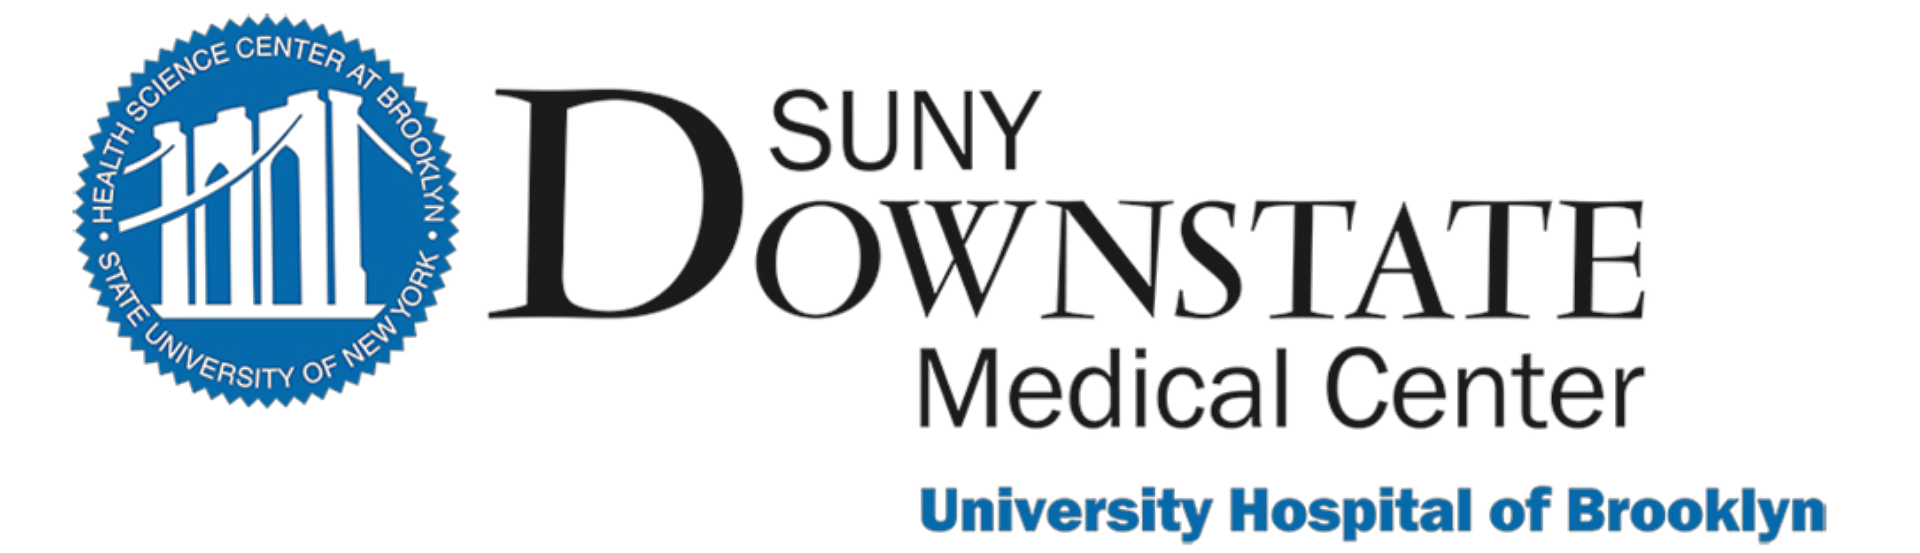 SUNY Downstate Medical Center & Well Screen-1